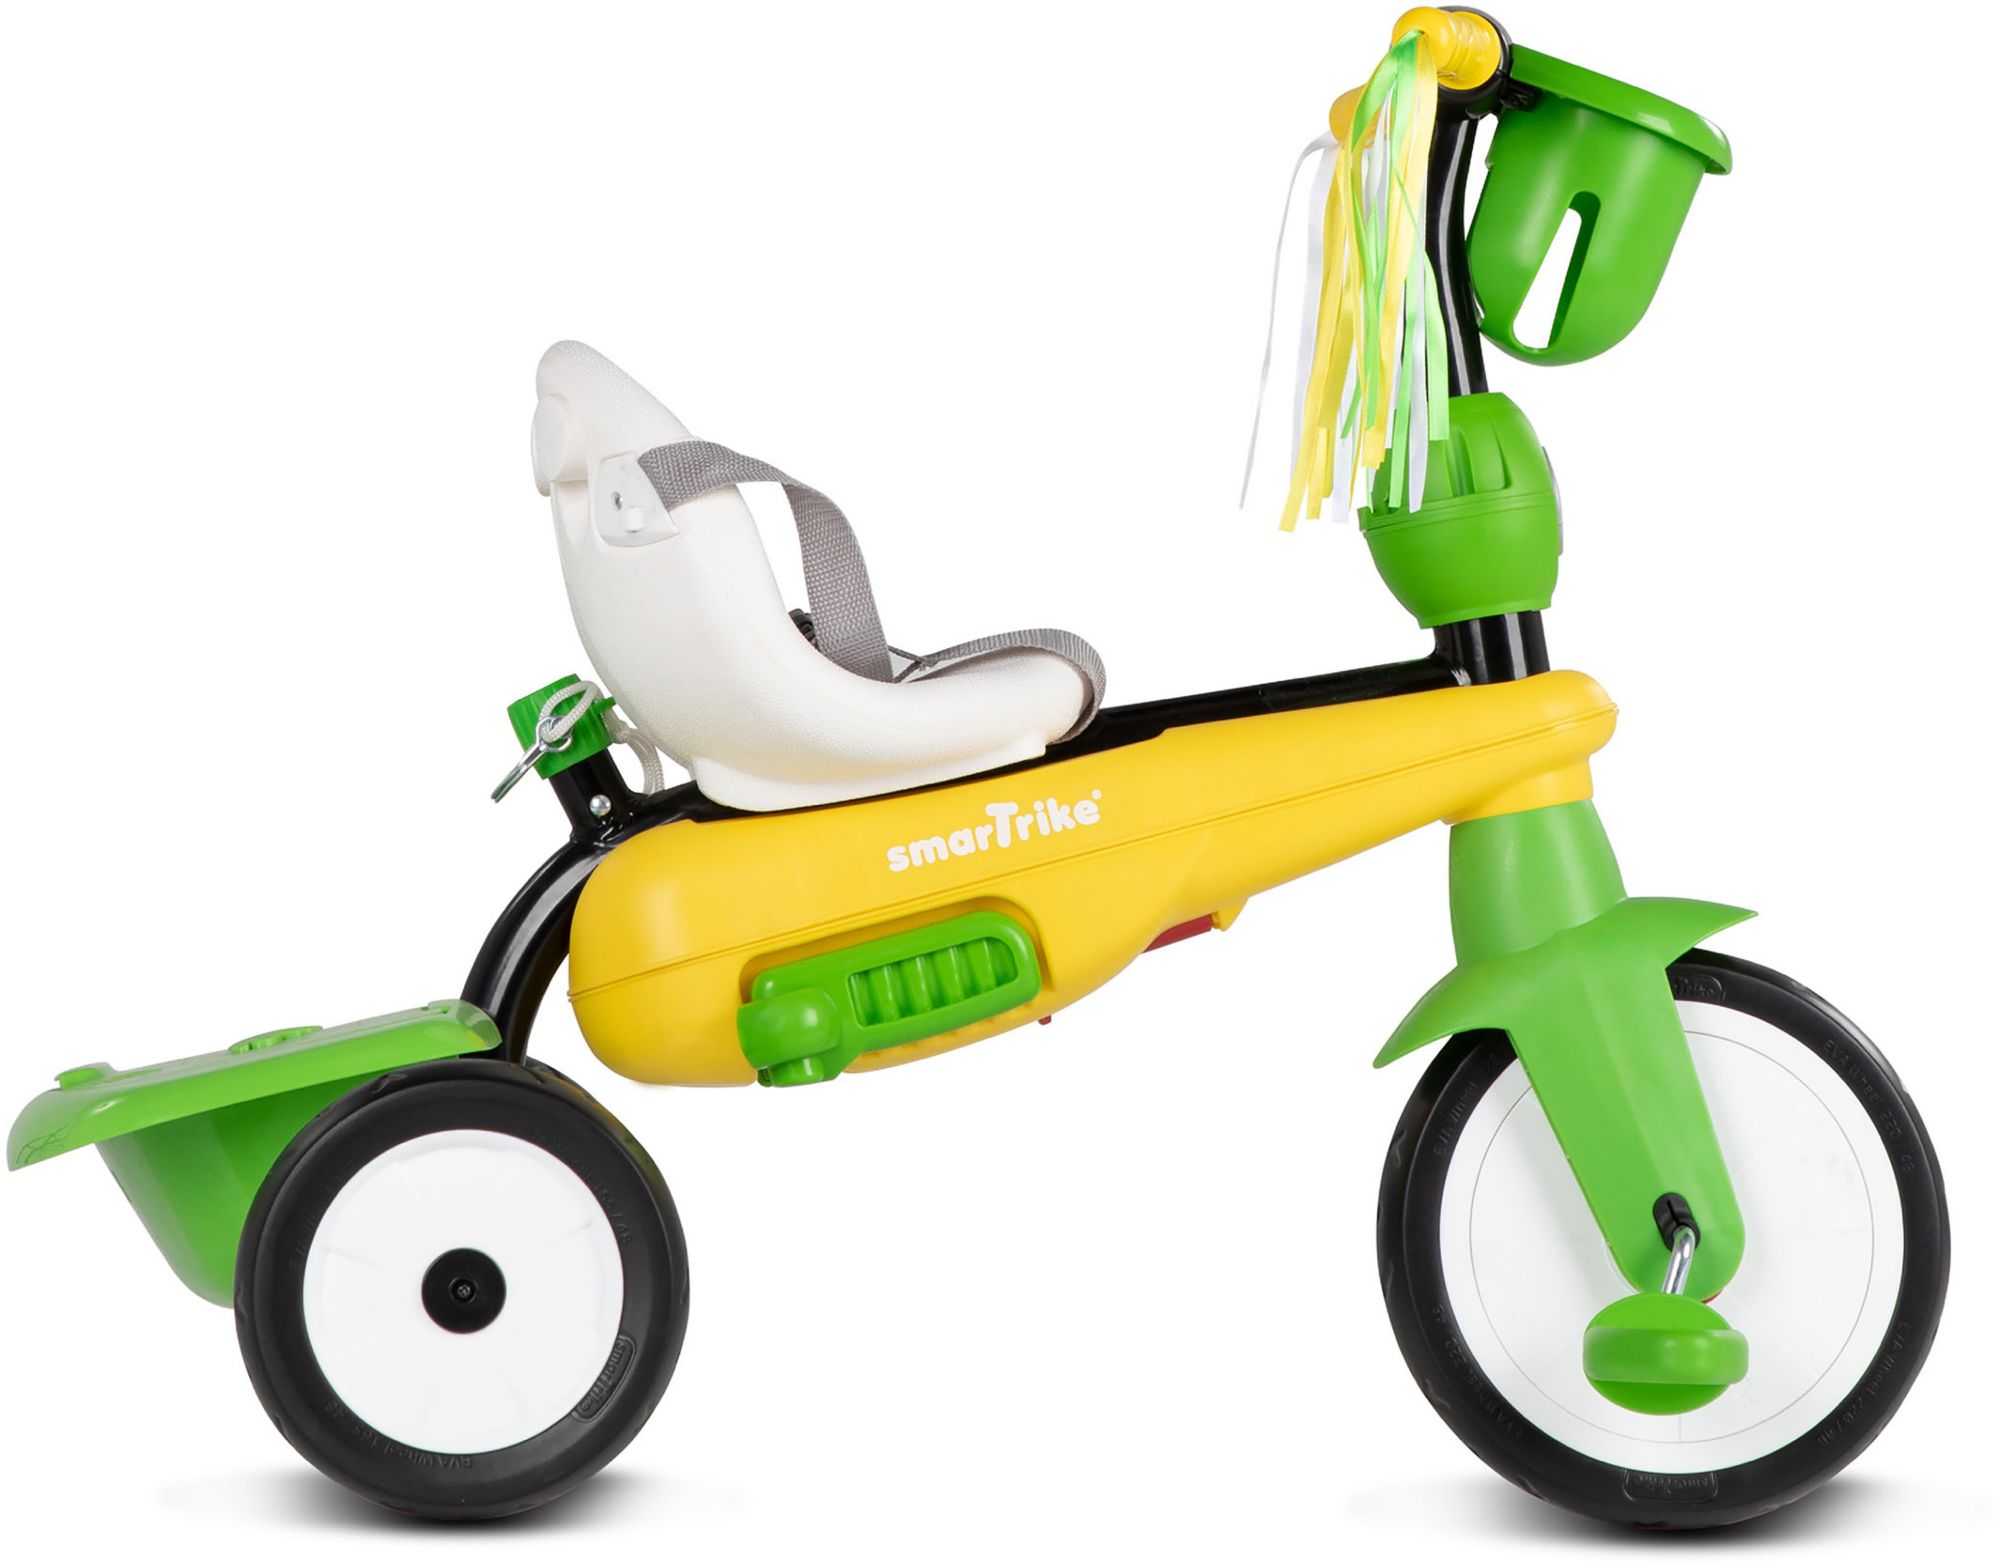 SmarTrike Breeze S 3-in-1 Toddler Tricycle